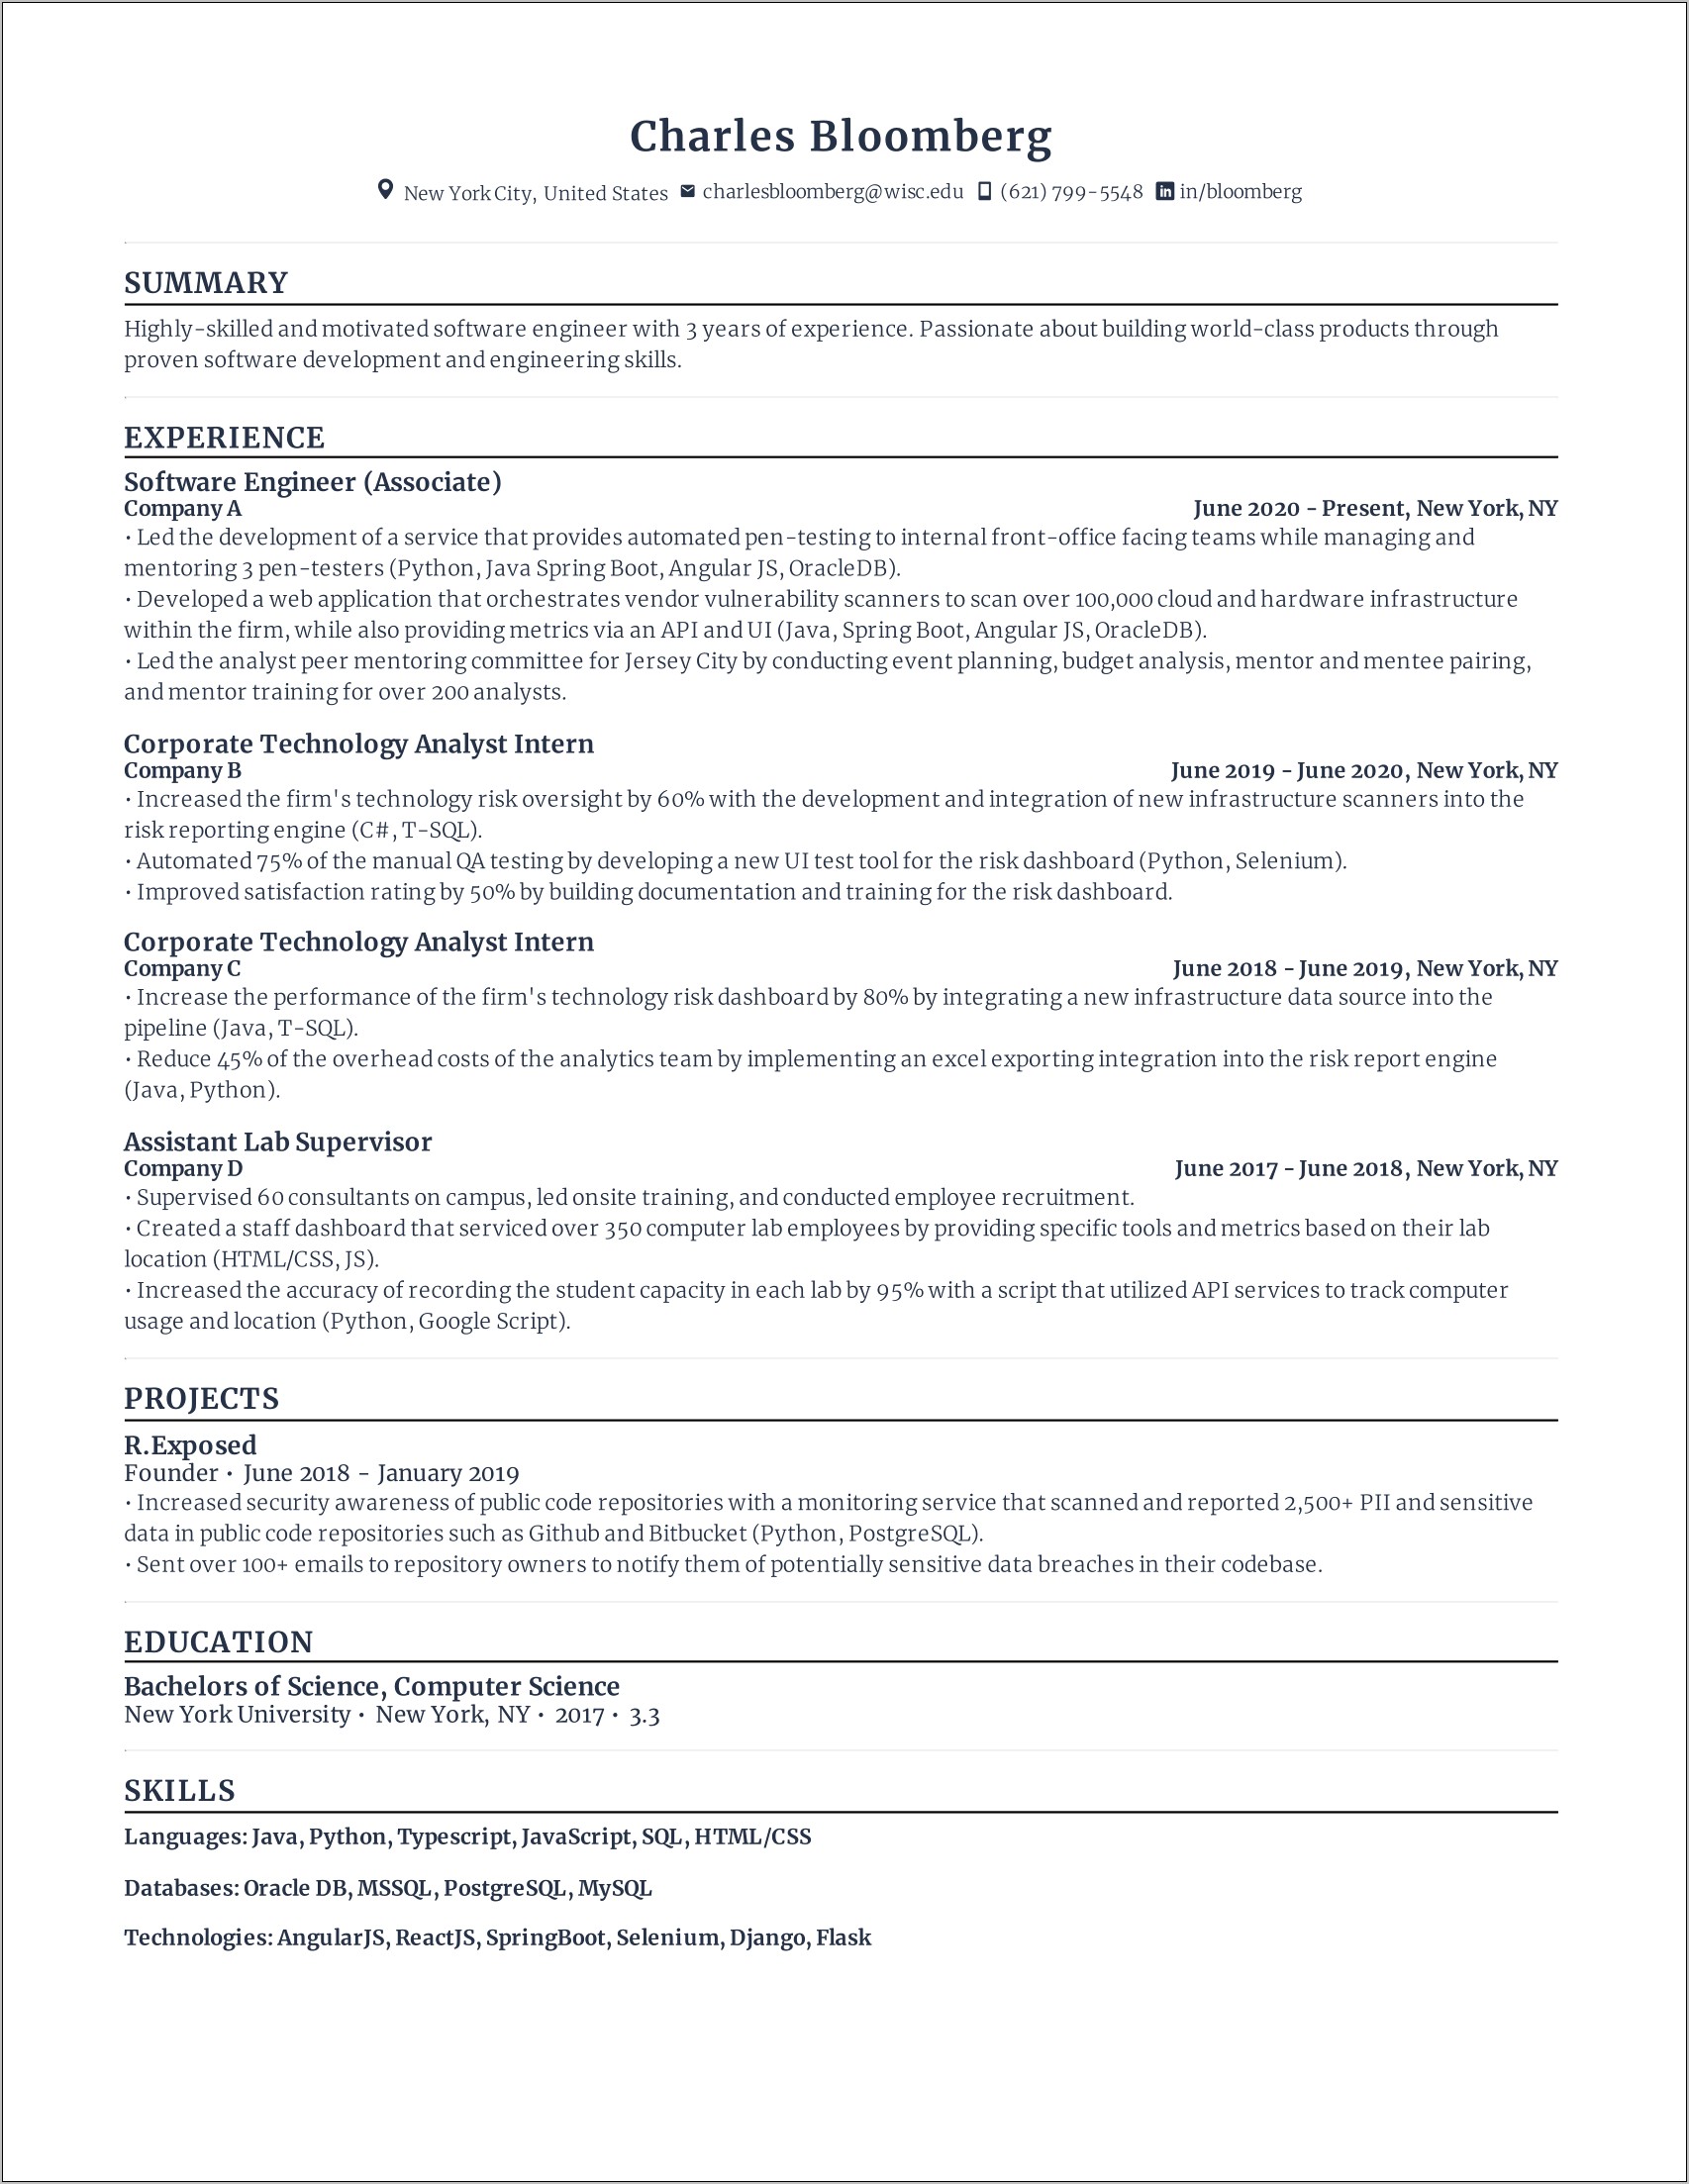 Healthcare Software Consultant Resume Samples